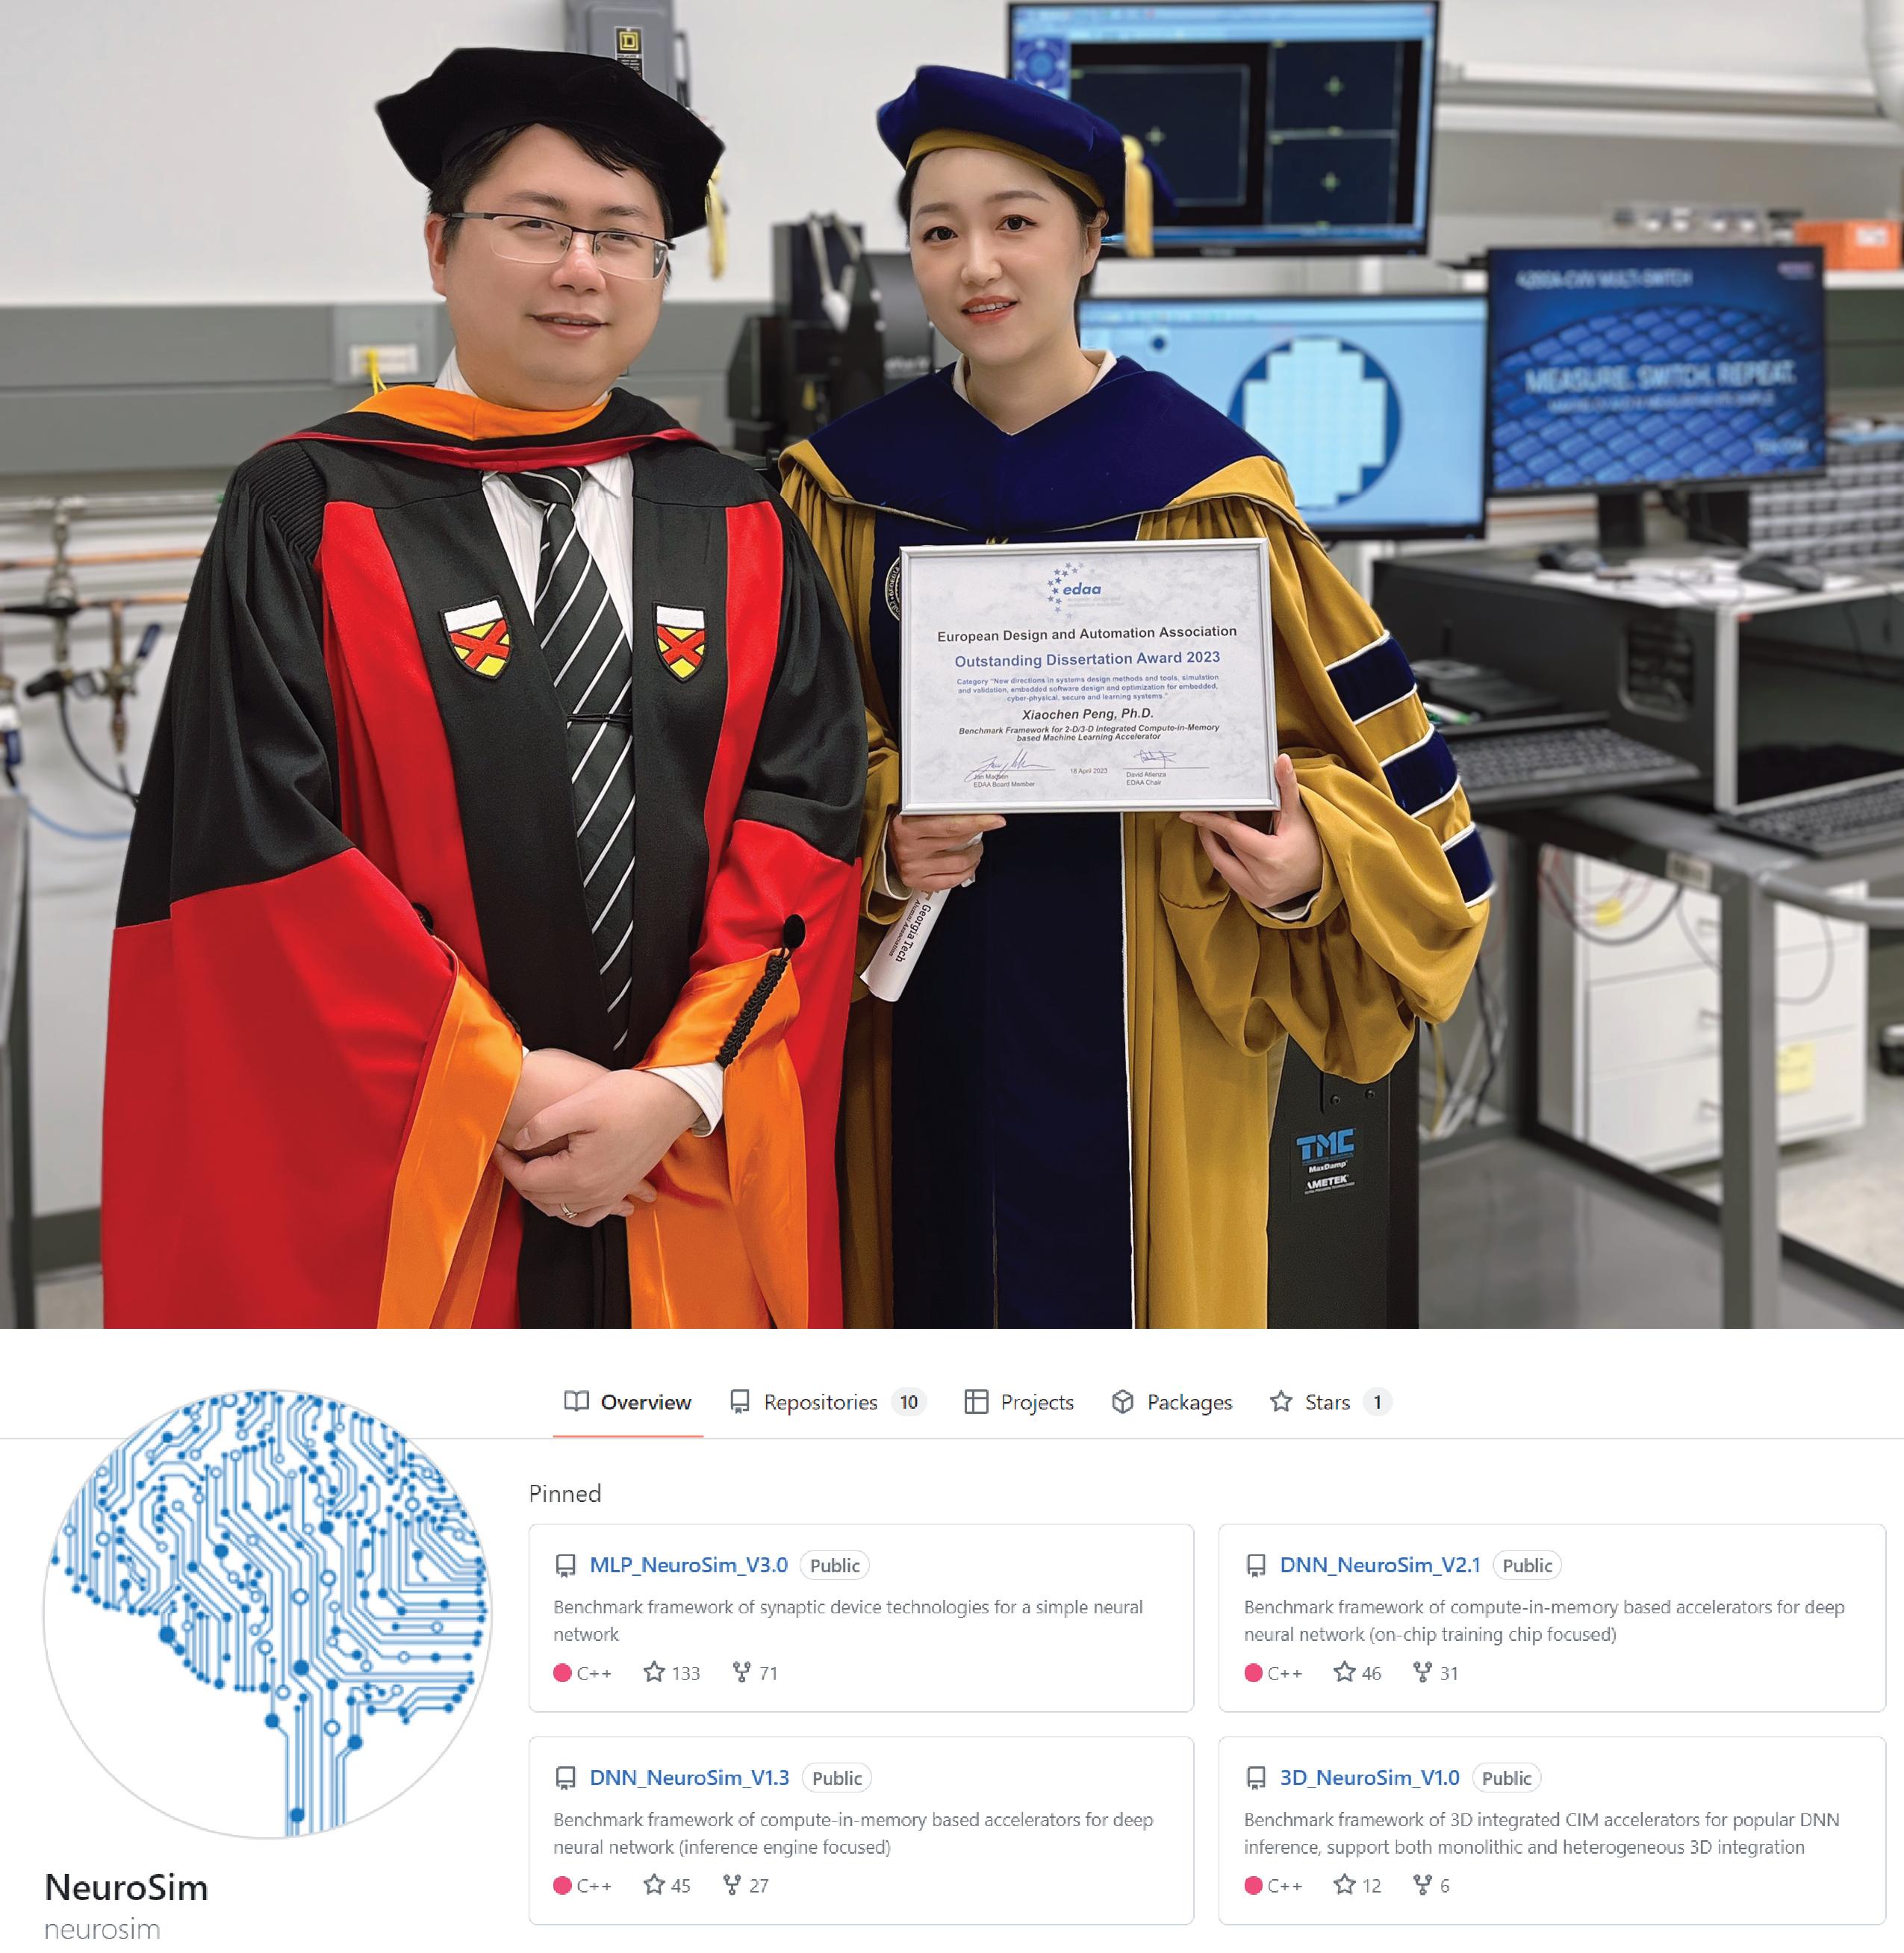 Peng and Yu in the research lab before the 2023 Spring Georgia Tech Commencement where Peng received her Ph.D. Peng is holding the EDAA’s Outstanding Dissertation Award for her NeuroSim series work.  Below is a graphic of the NeuroSim open-source simulator on GitHub (https://github.com/neurosim). 